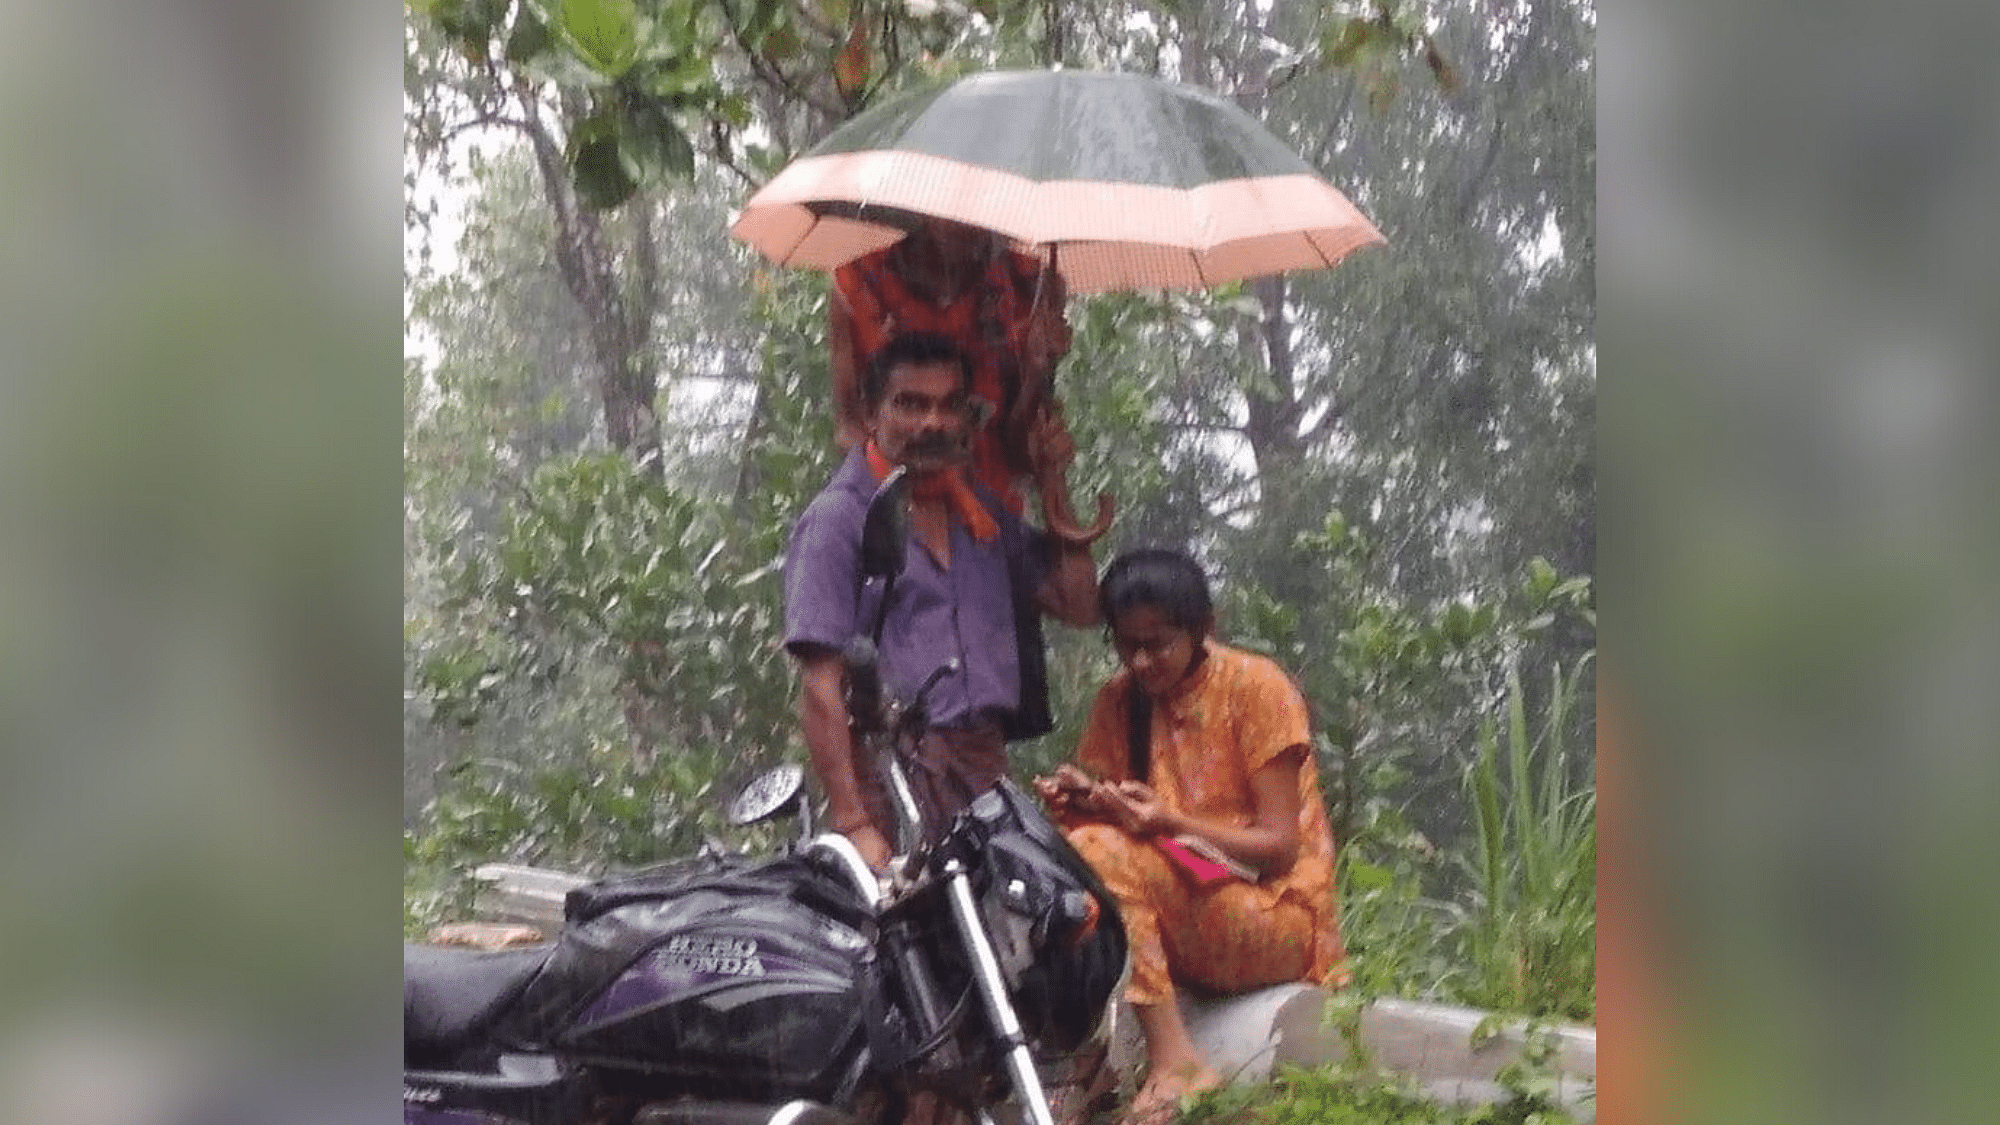 Father Holds Umbrella for Daughter Attending Online Classes in the Rain by Roadside